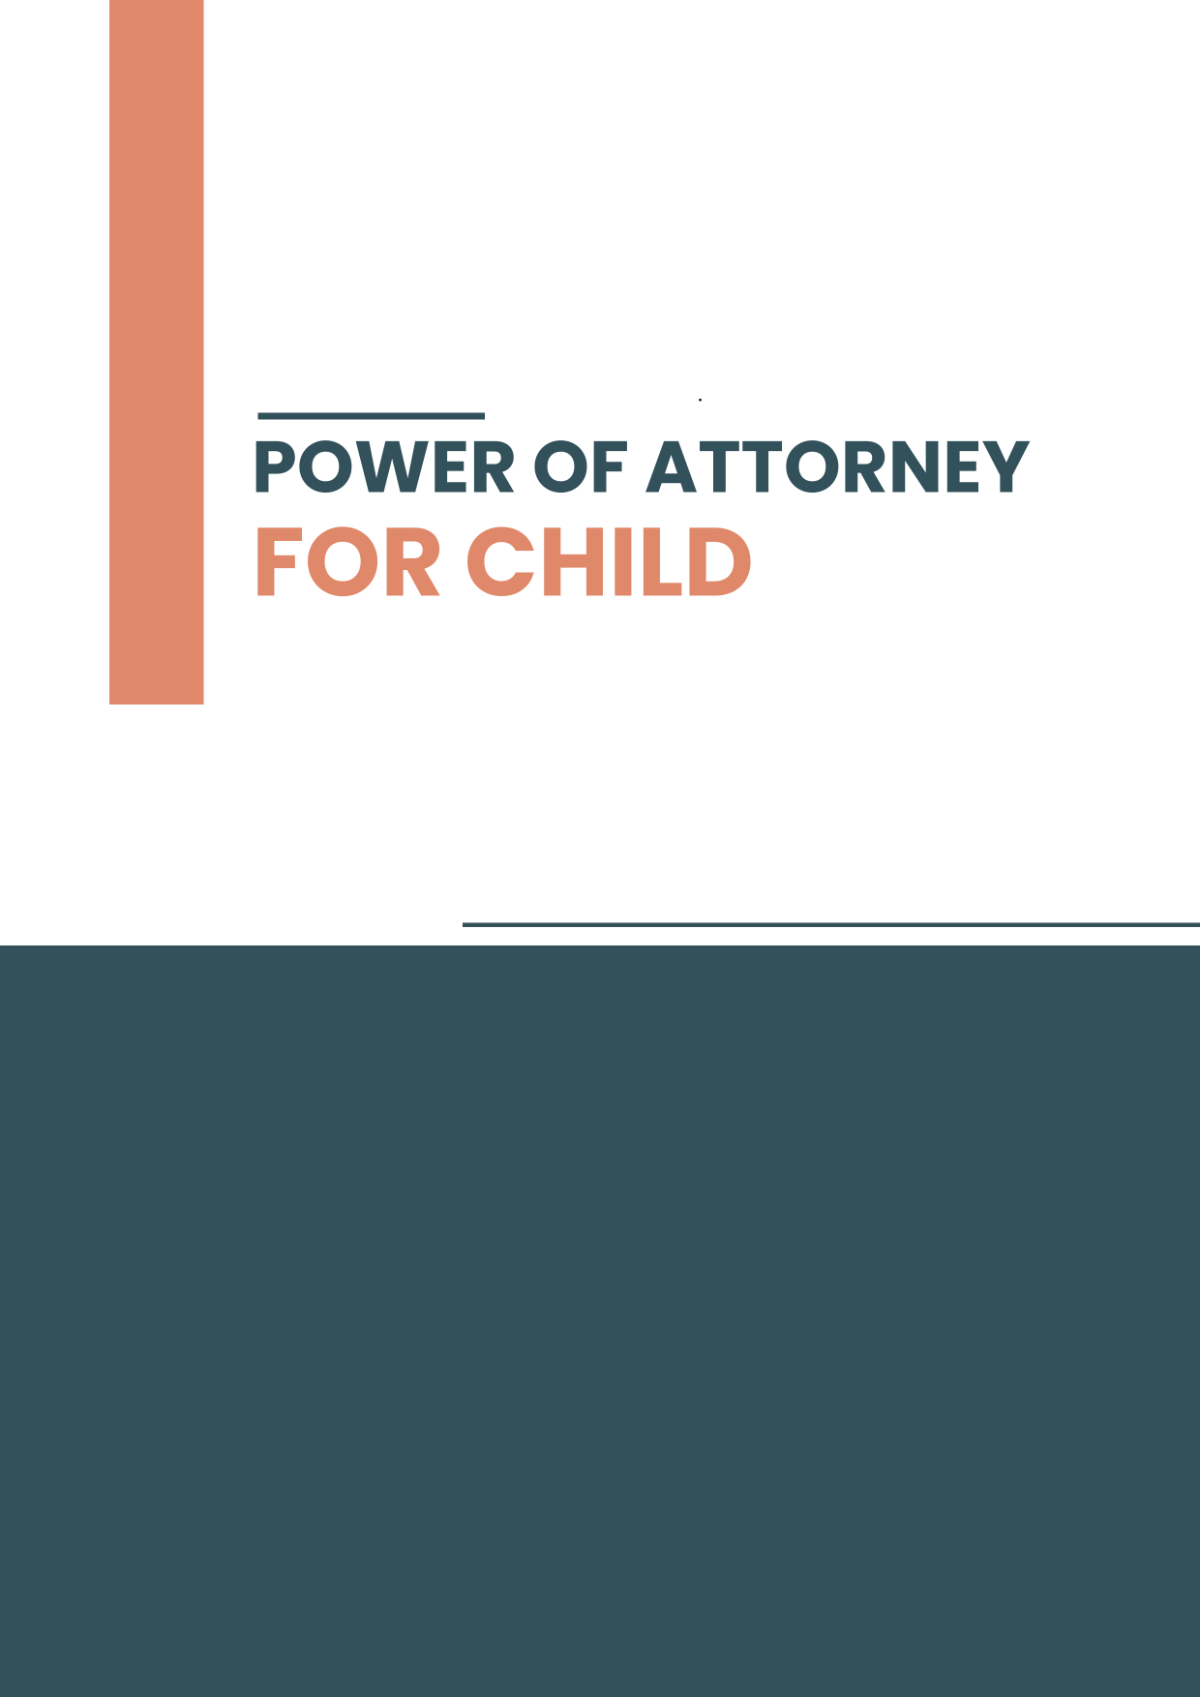 Power of Attorney For Child Template